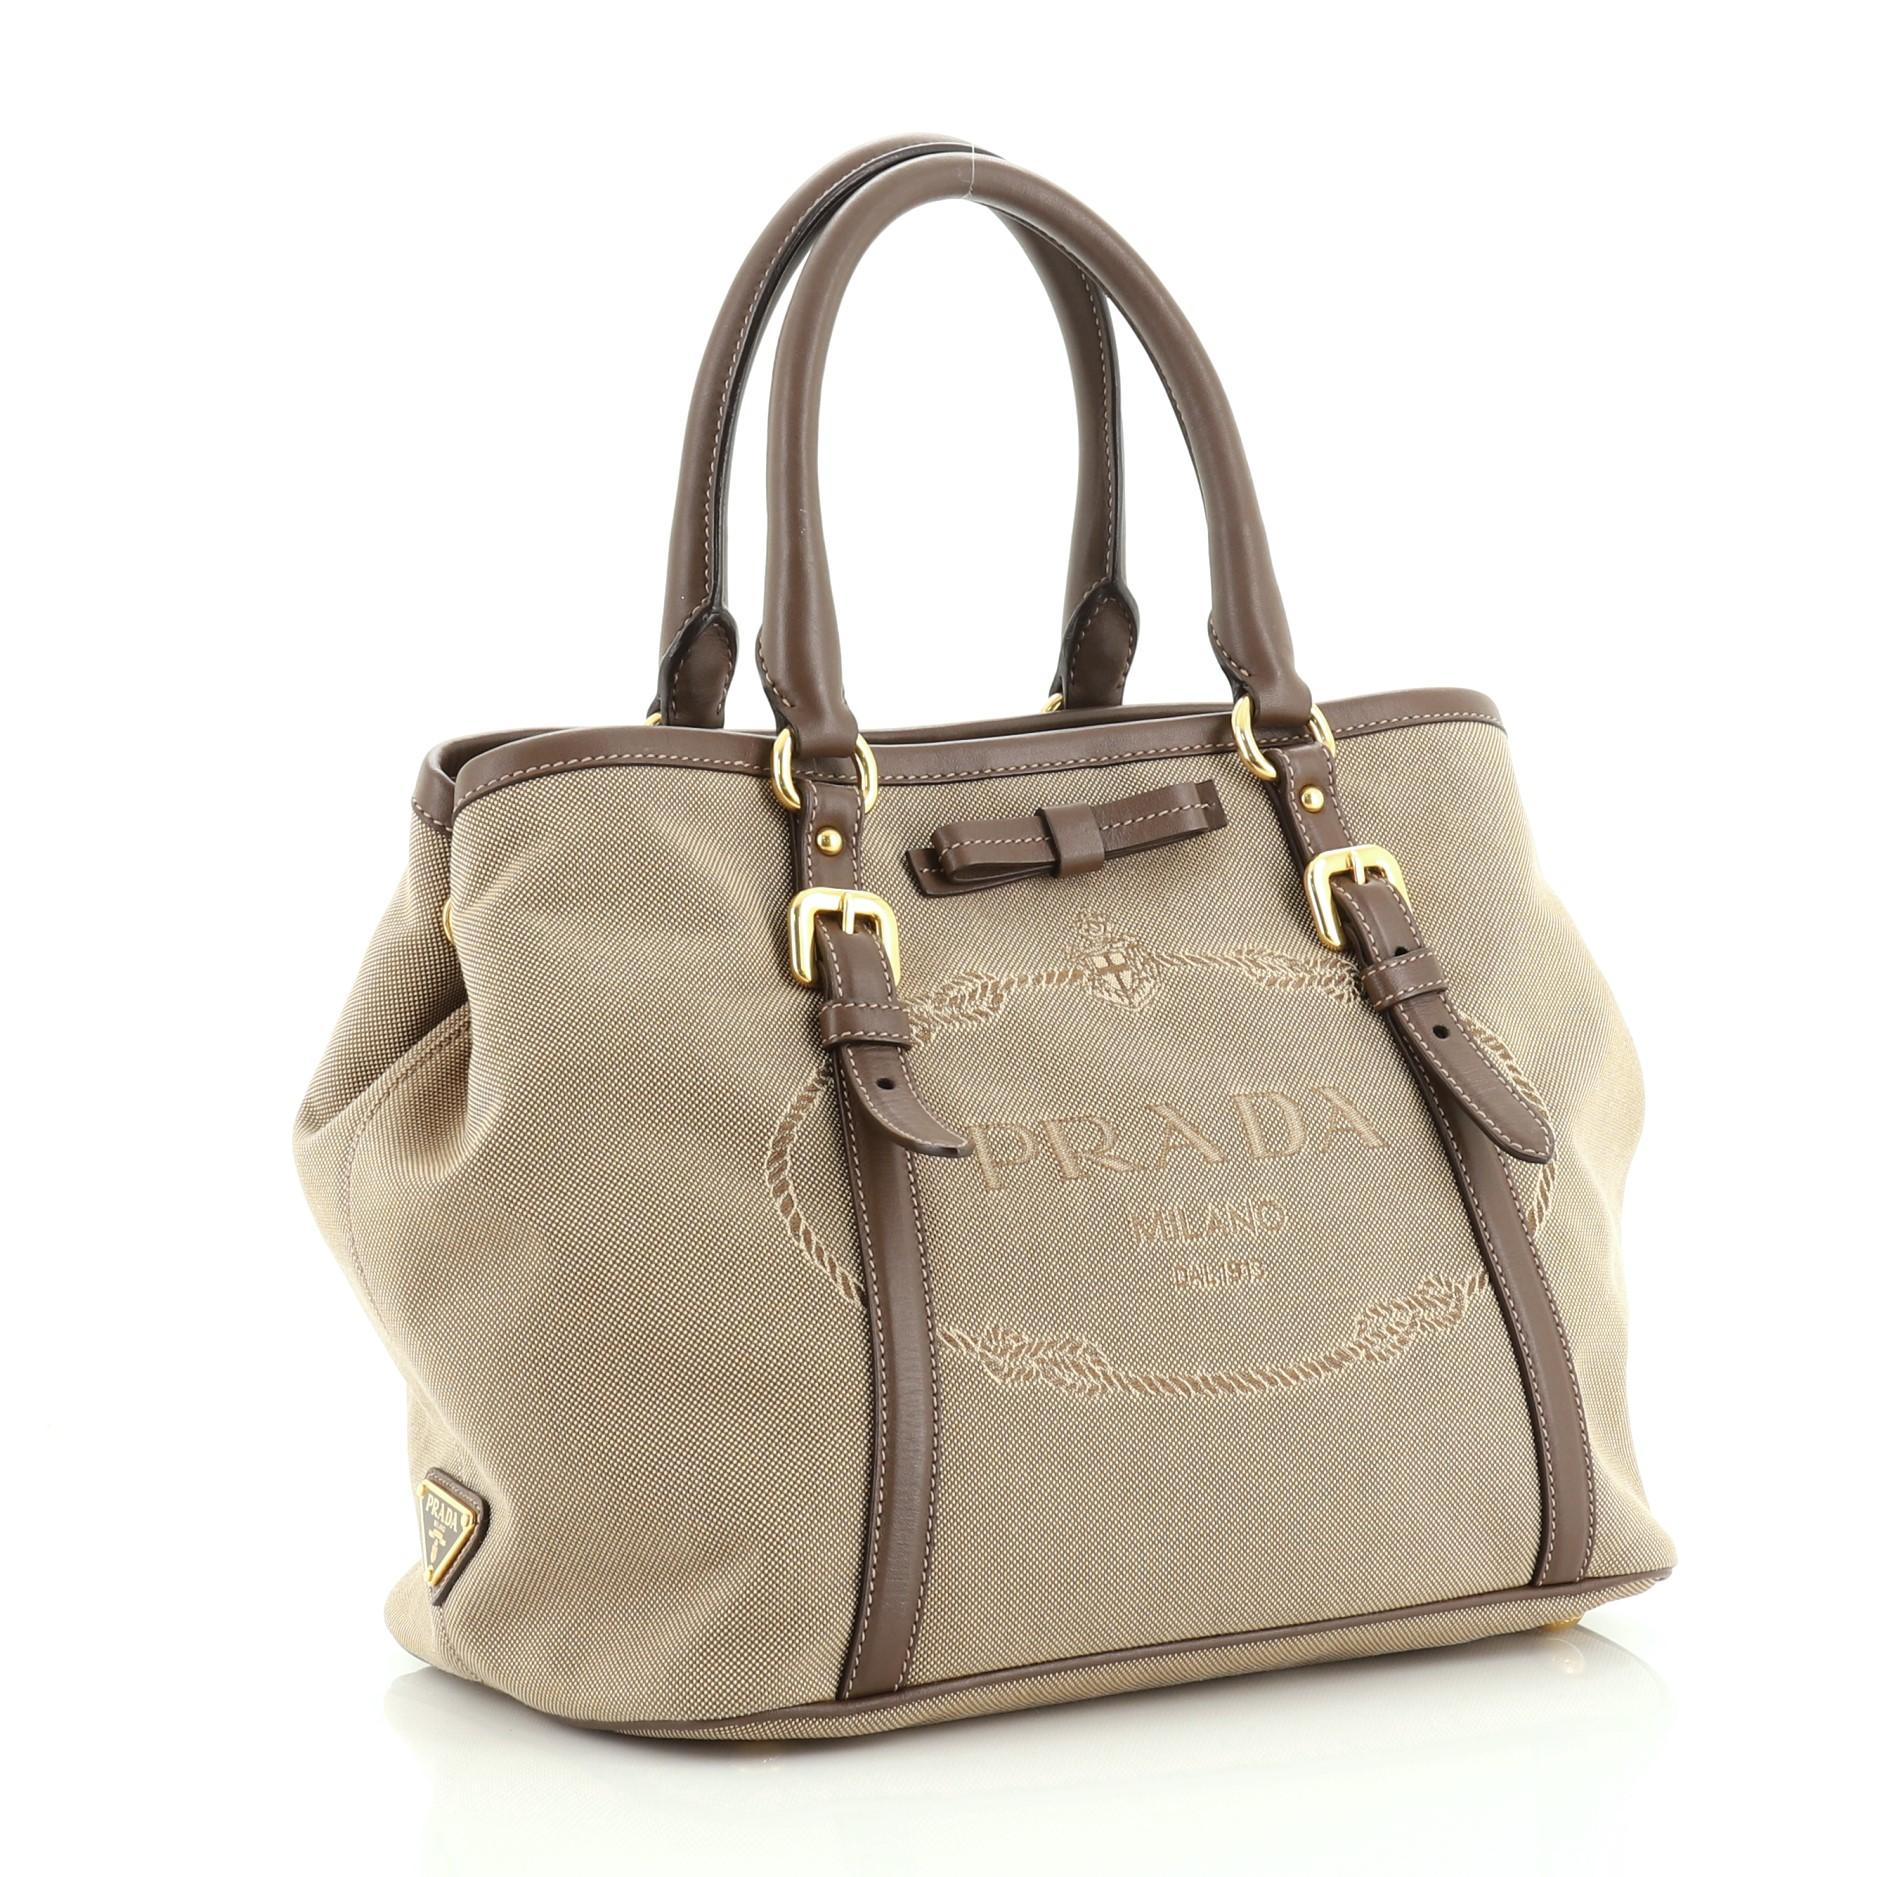 This Prada Logo Convertible Tote Canvas with Leather Medium, crafted from brown leather and canvas, features Prada logo at the front, dual rolled handles and gold tone hardware. It opens to a brown fabric interior with zip pocket. 

Estimated Retail